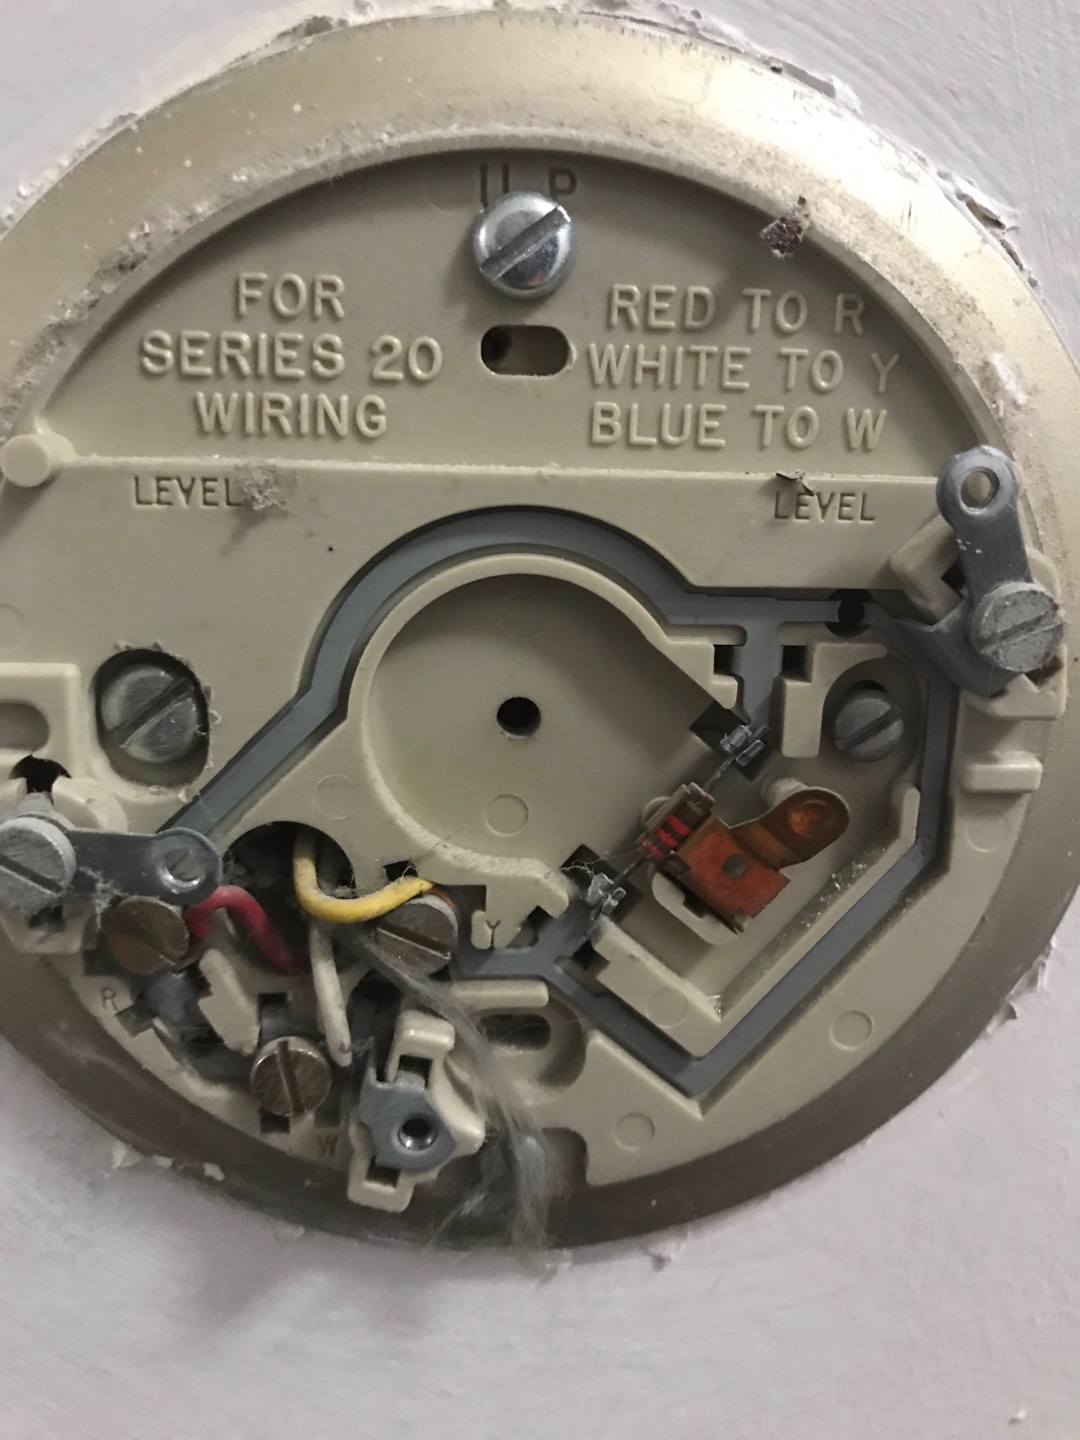 furnace_wires connected with thermostat_basement.jpg